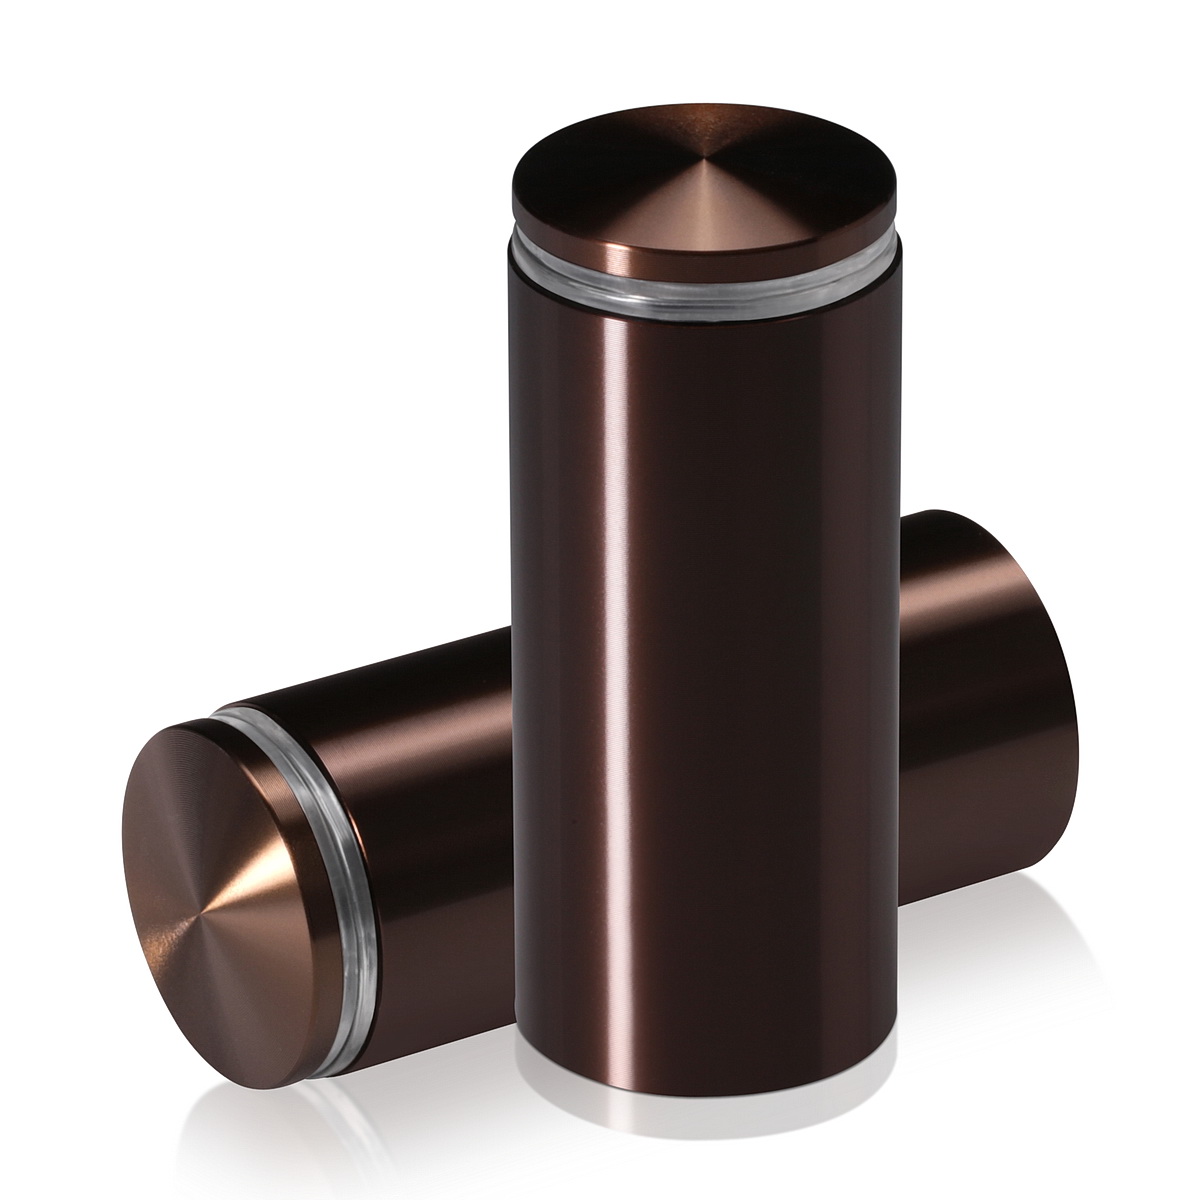 1-1/4'' Diameter X 2-1/2'' Barrel Length, Aluminum Rounded Head Standoffs, Bronze Anodized Finish Easy Fasten Standoff (For Inside / Outside use) [Required Material Hole Size: 7/16'']